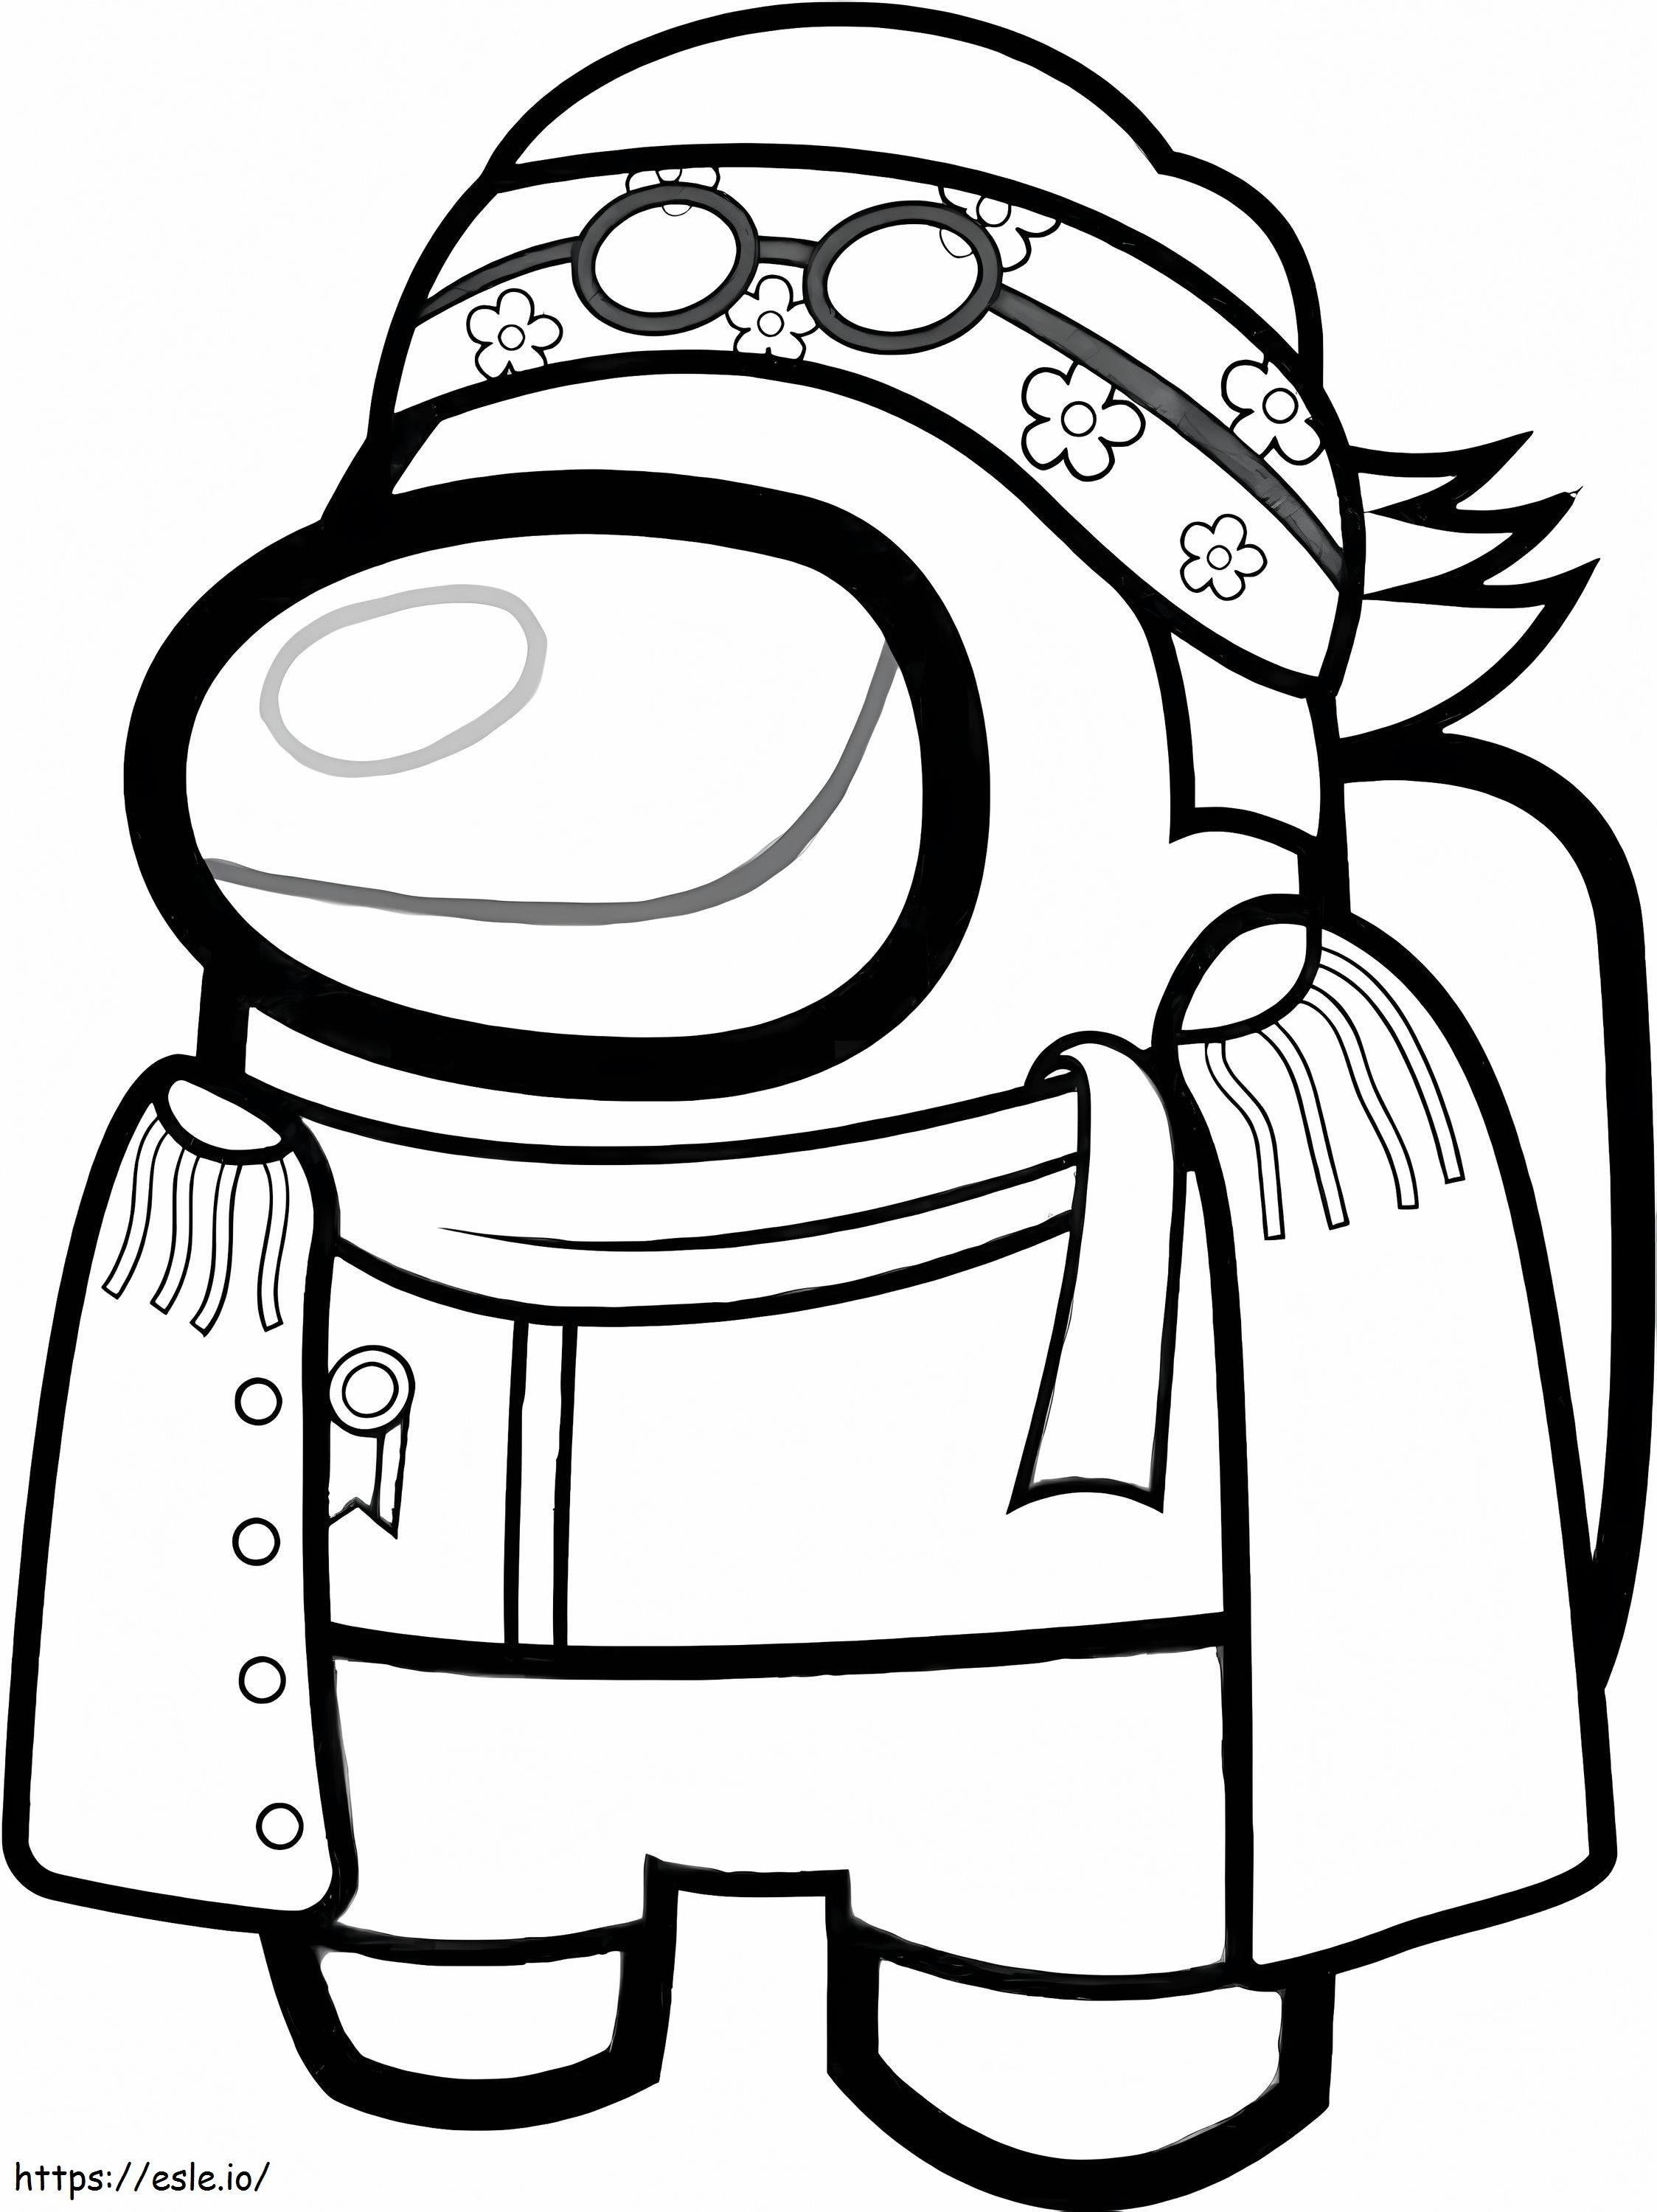 Coby Among Us coloring page